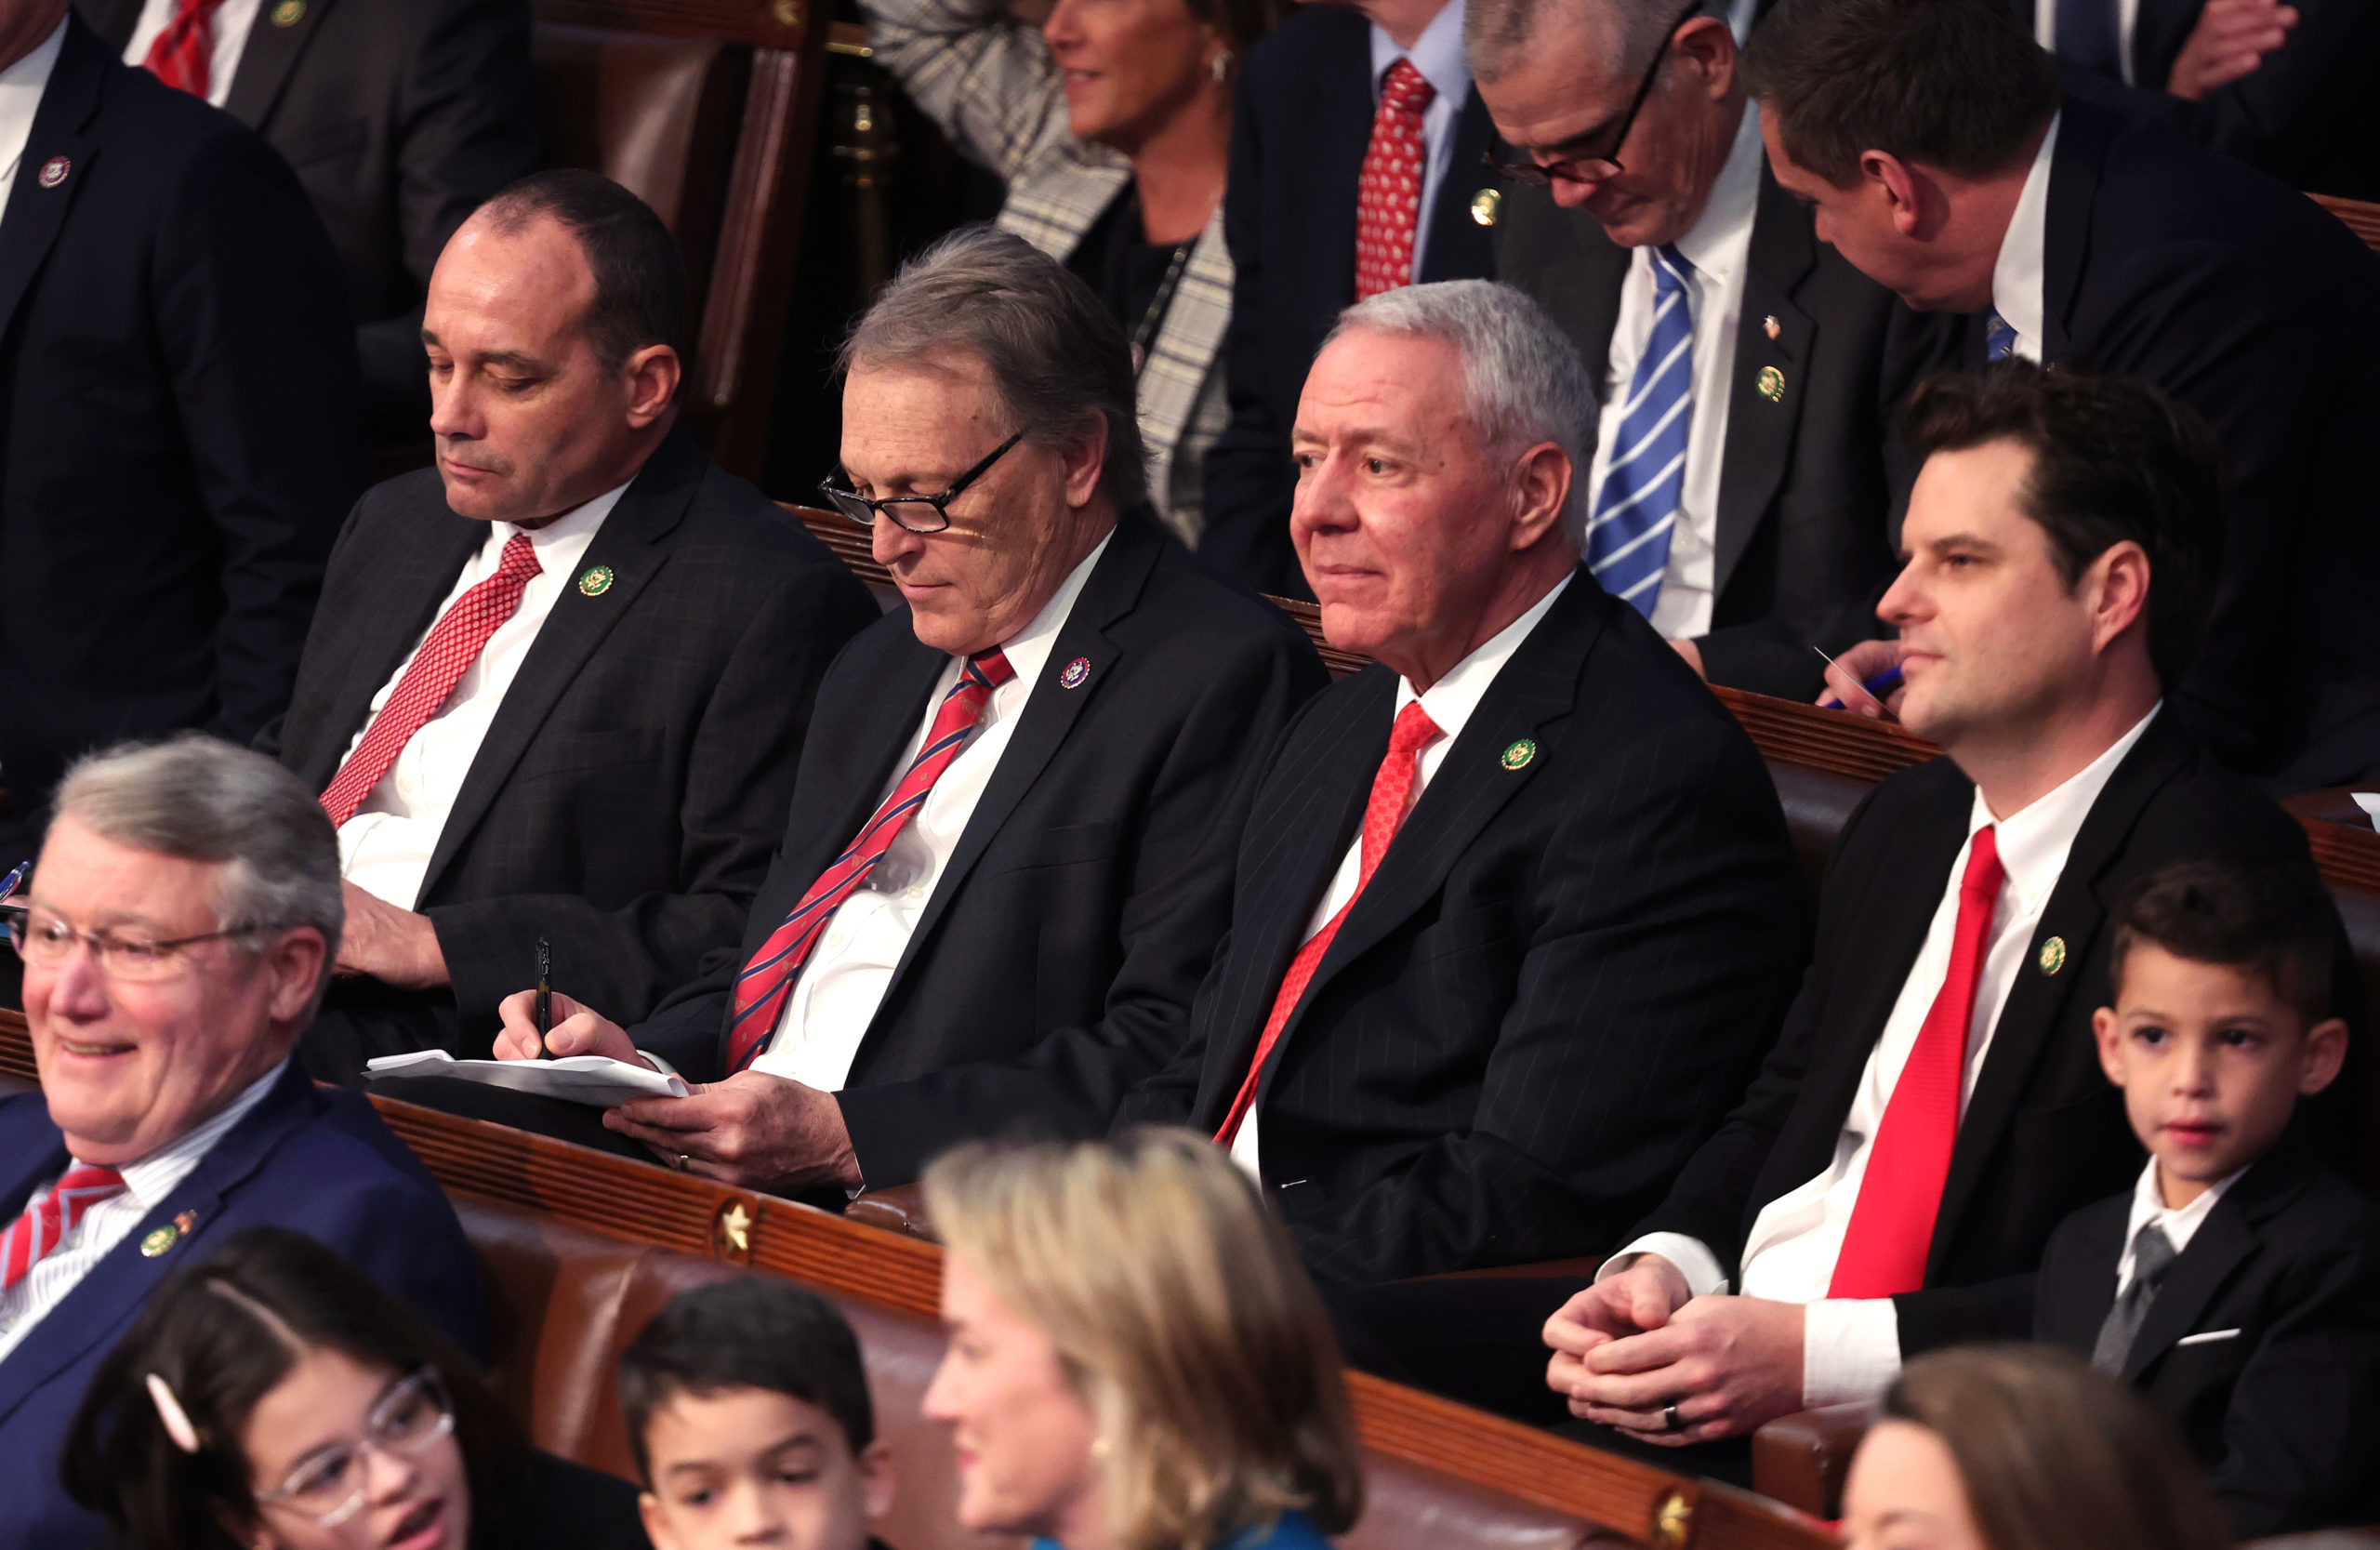 WASHINGTON, DC - JANUARY 03: (L-R) U.S. Rep. Bob Good (R-VA), Rep. Andy Biggs (R-AZ), Rep. Ken Buck (R-CO) and Rep. Matt Gaetz (R-FL) listen to floor proceedings during the first day of the 118th Congress in the House Chamber of the U.S. Capitol Building on January 03, 2023 in Washington, DC. Today members of the 118th Congress will be sworn-in and the House of Representatives will elect a new Speaker of the House. (Photo by Win McNamee/Getty Images)